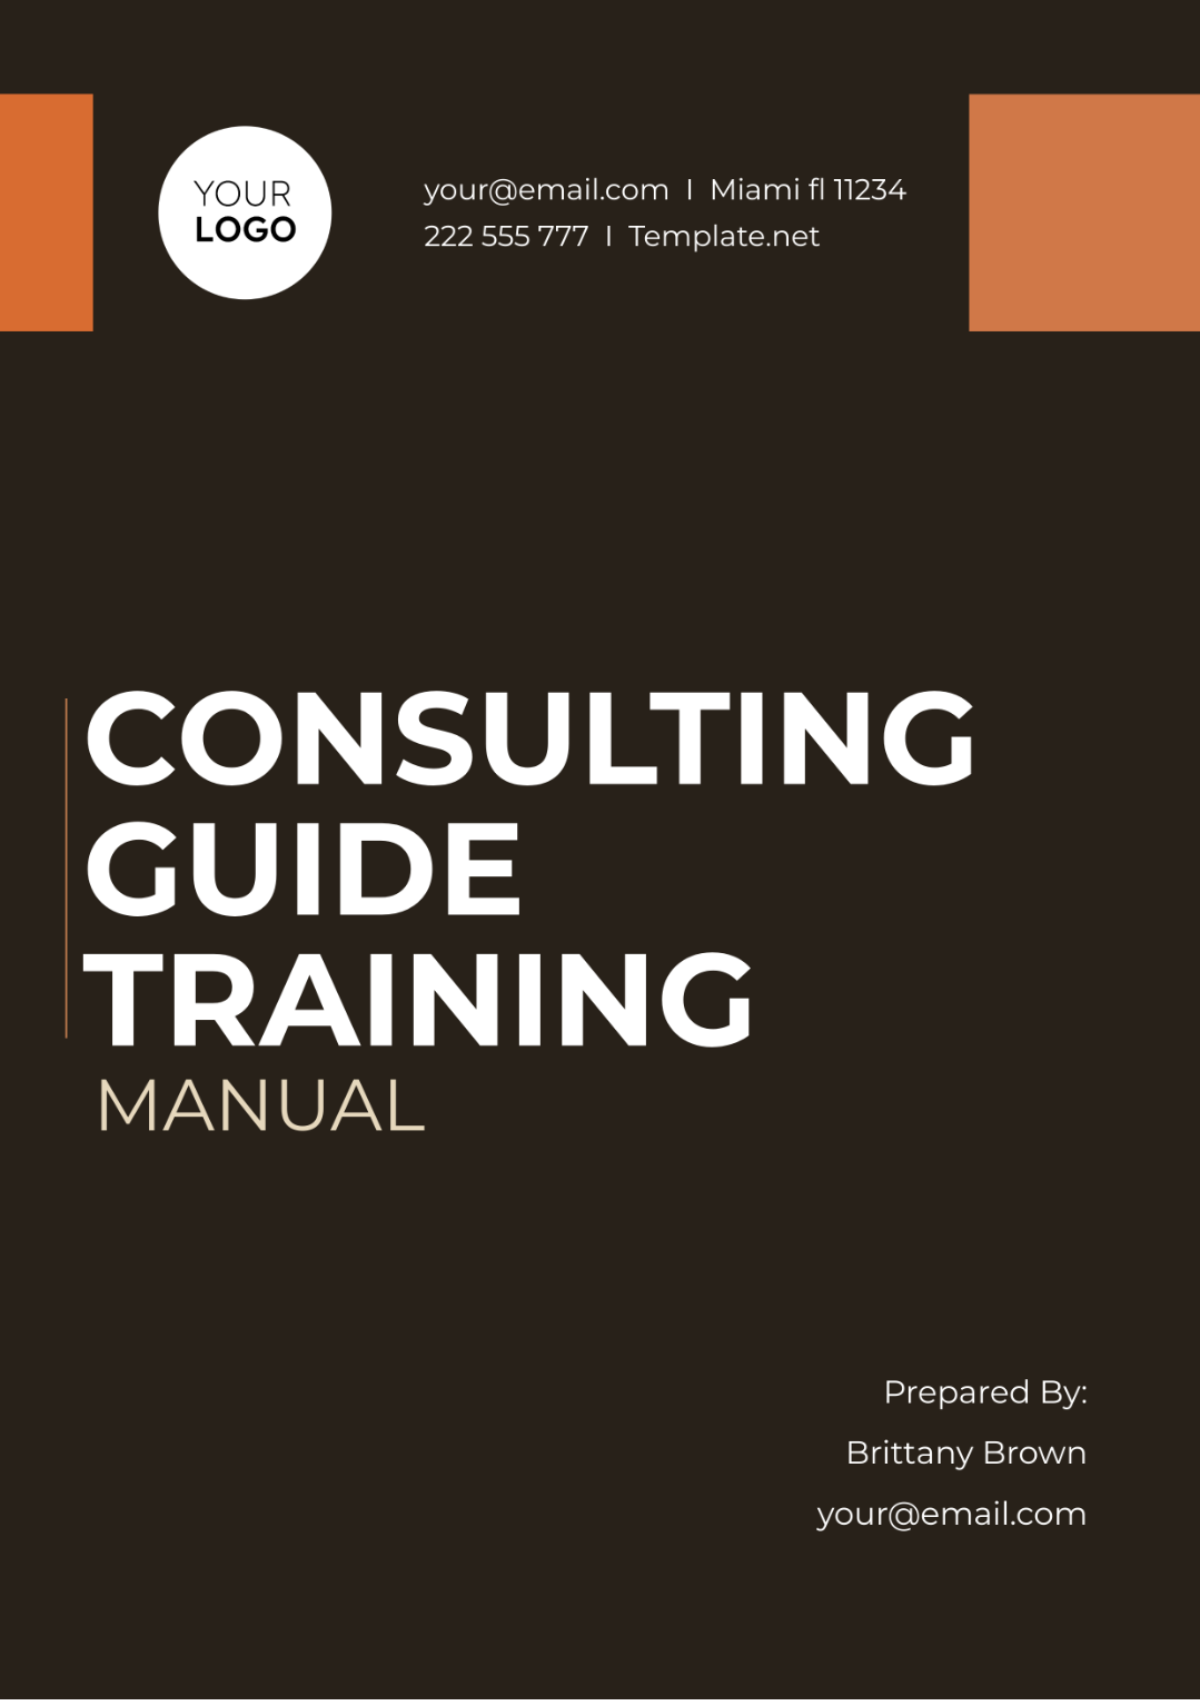 Consulting Guide Training Manual Template